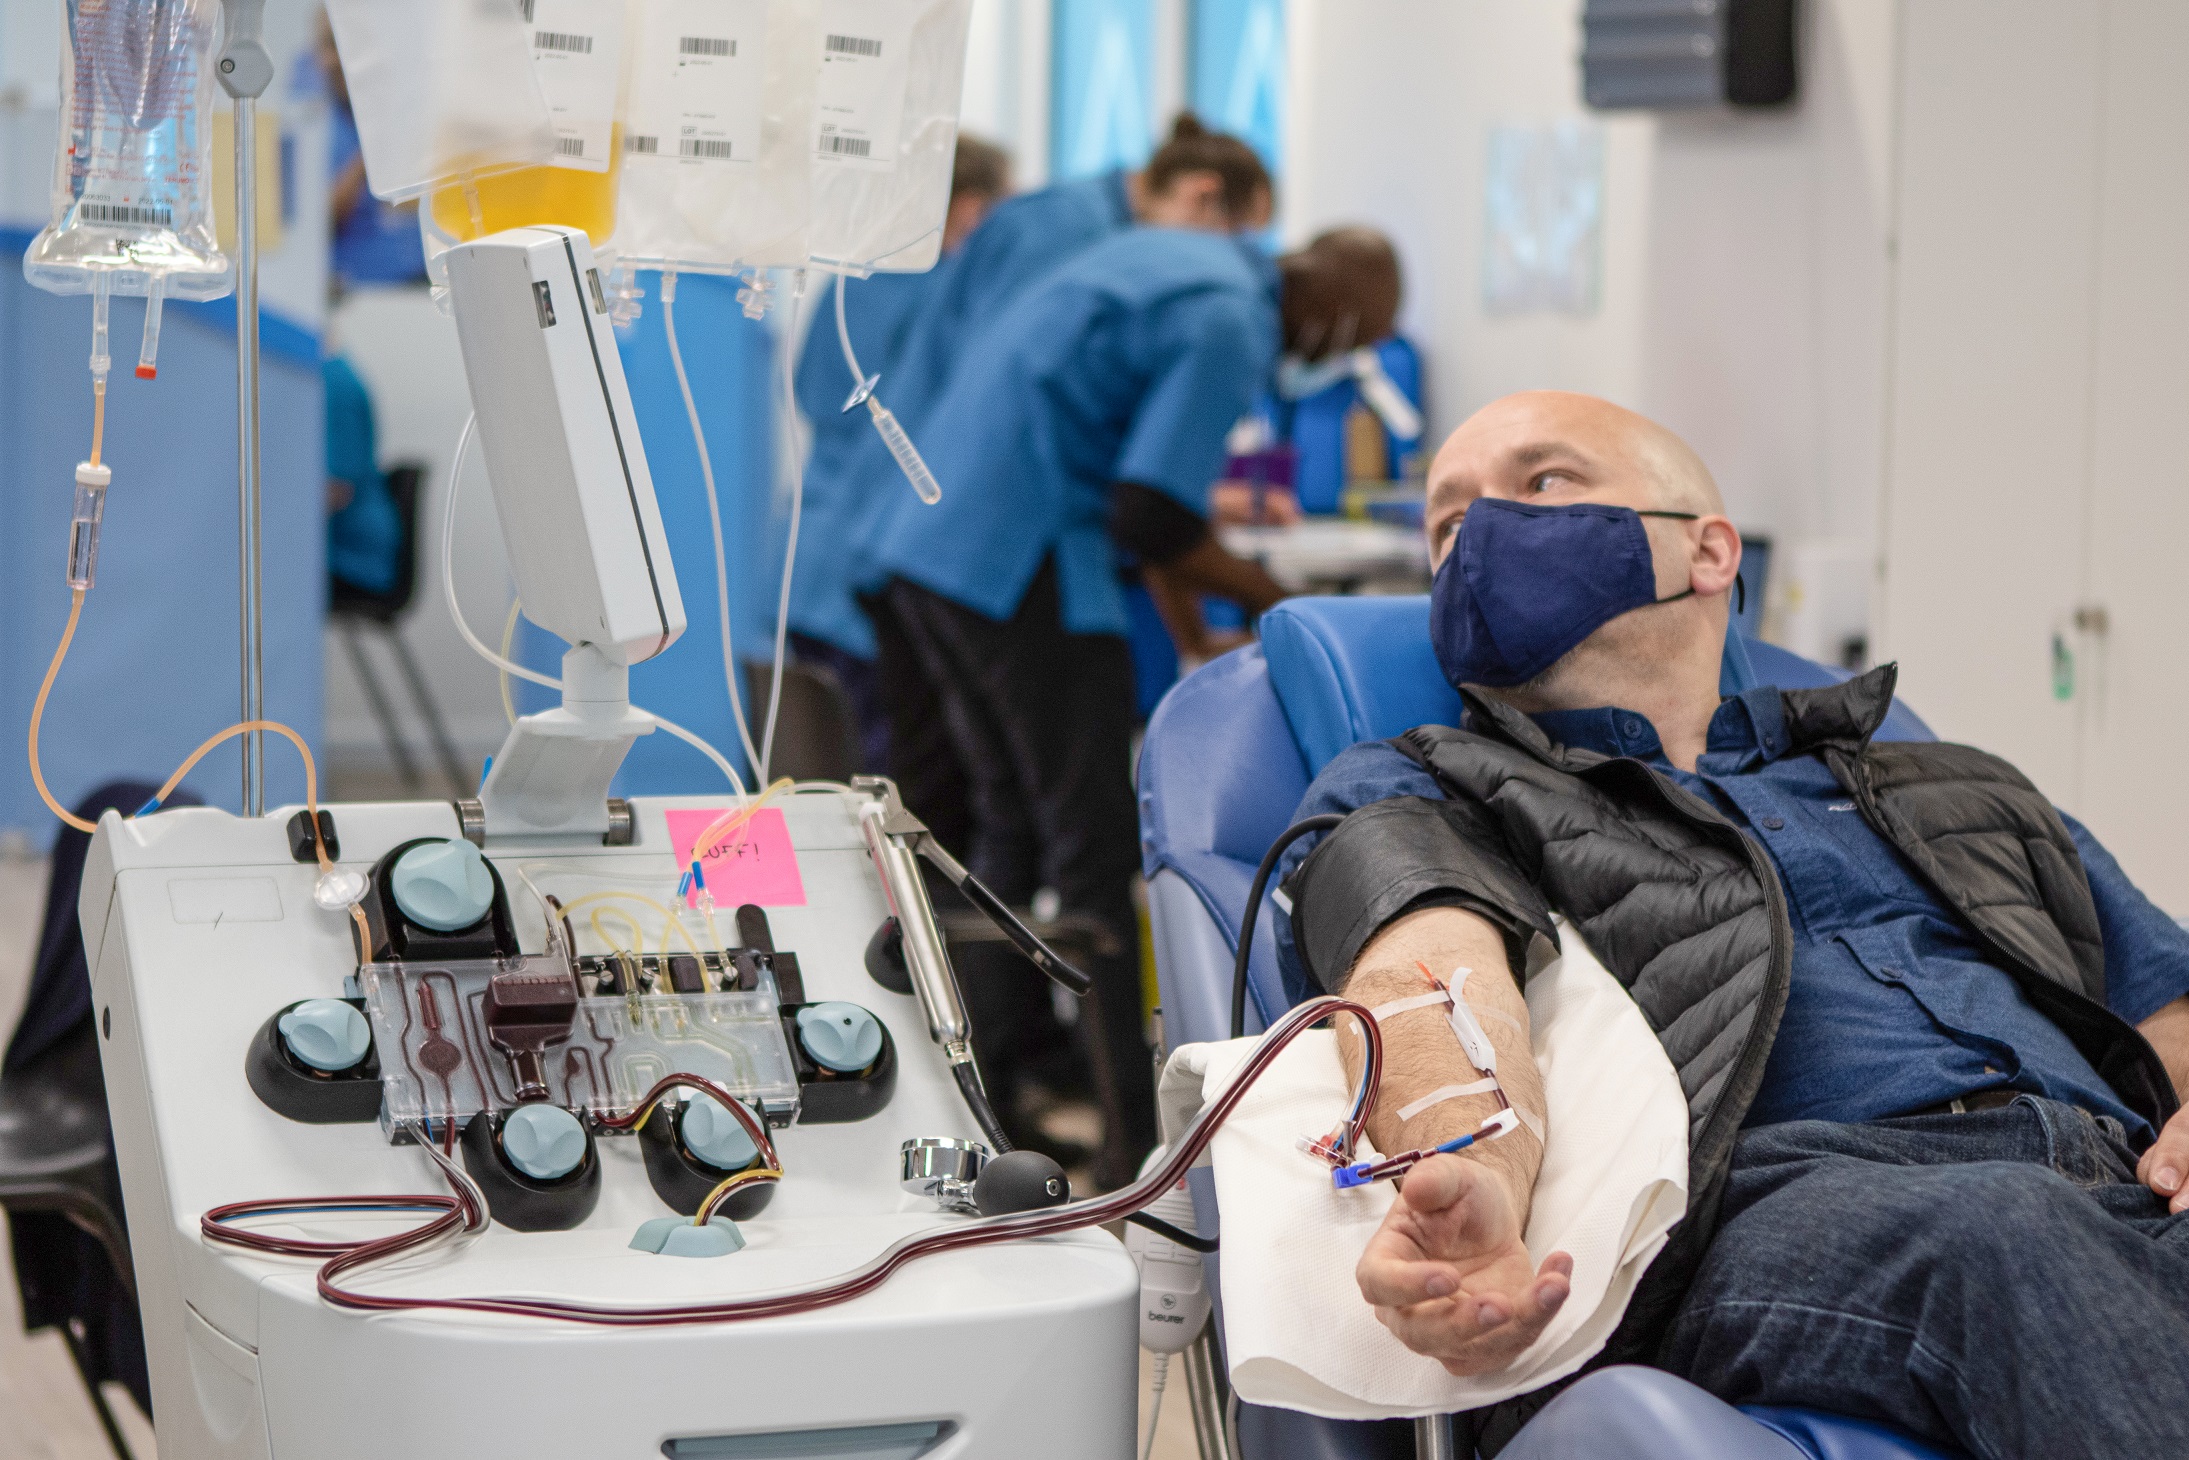 plasma-donation-restarts-in-the-uk-for-the-first-time-in-more-than-20